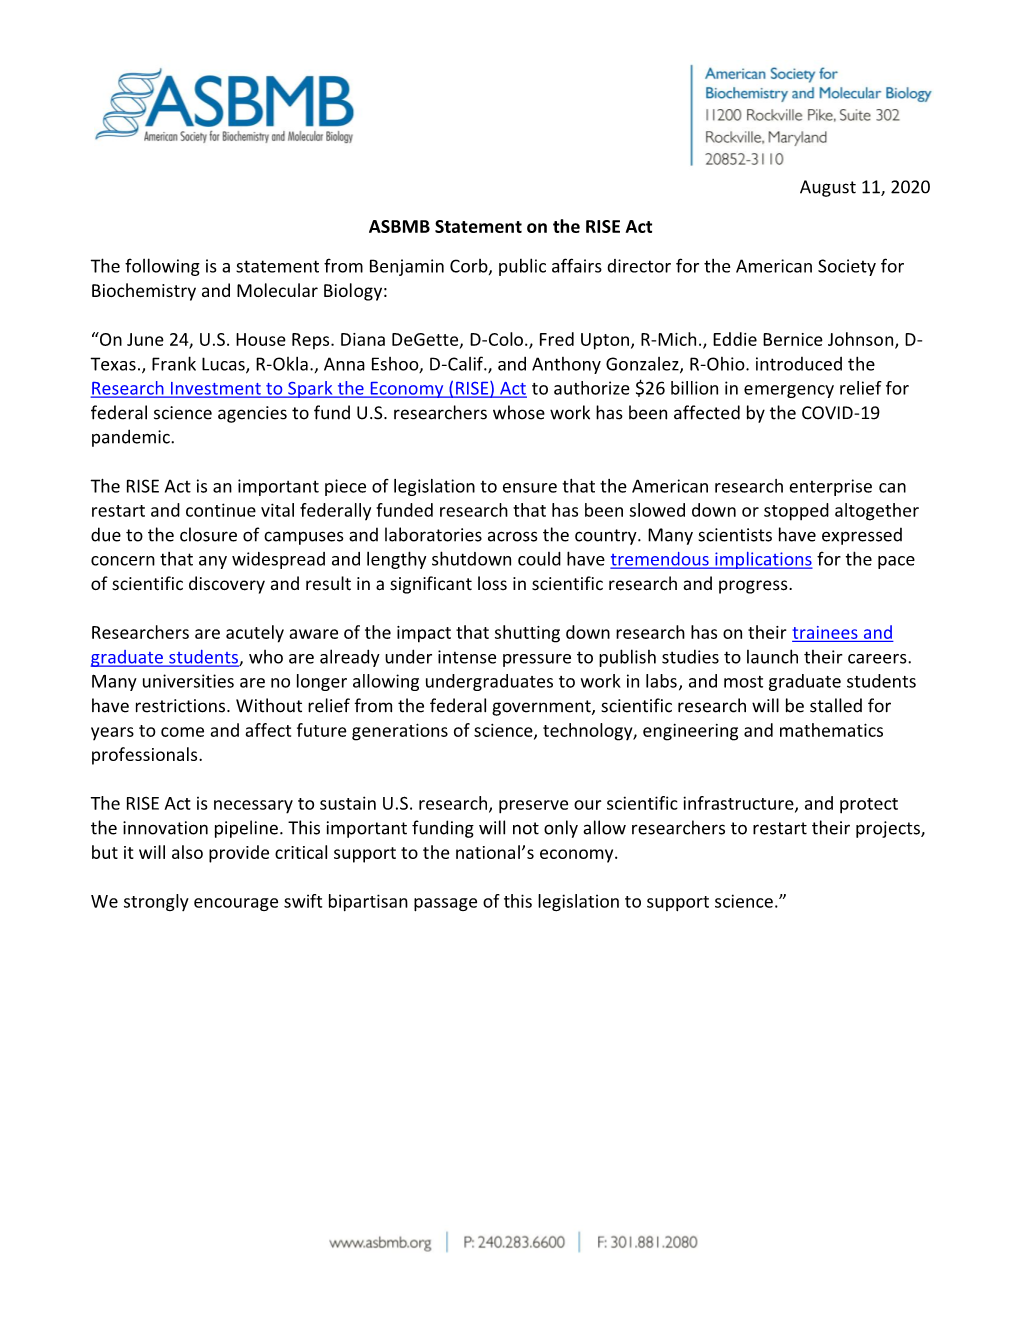 ASBMB Statement on the RISE